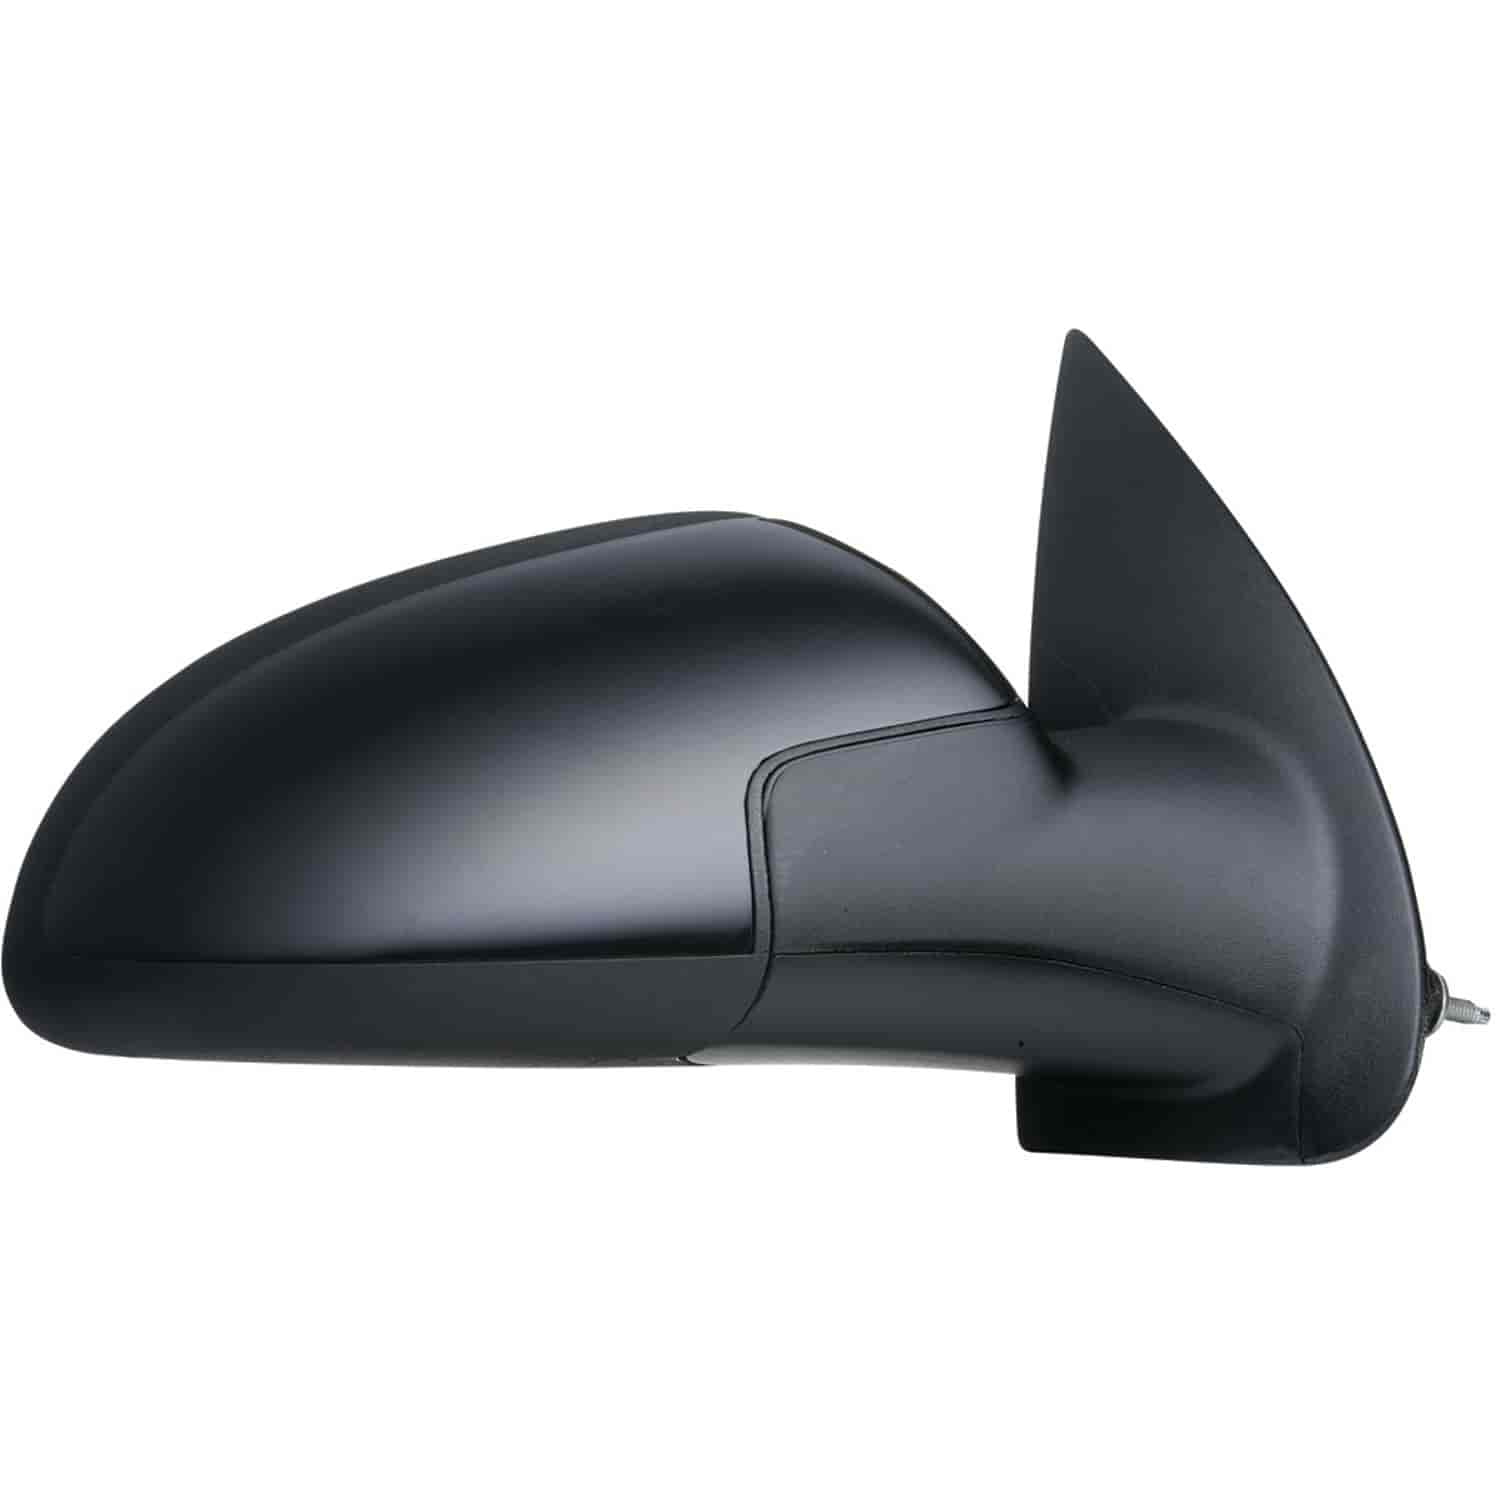 OEM Style Replacement mirror for 05-10 Chevrolet Cobalt Coupe 07-10 Pontiac G5 passenger side mirror